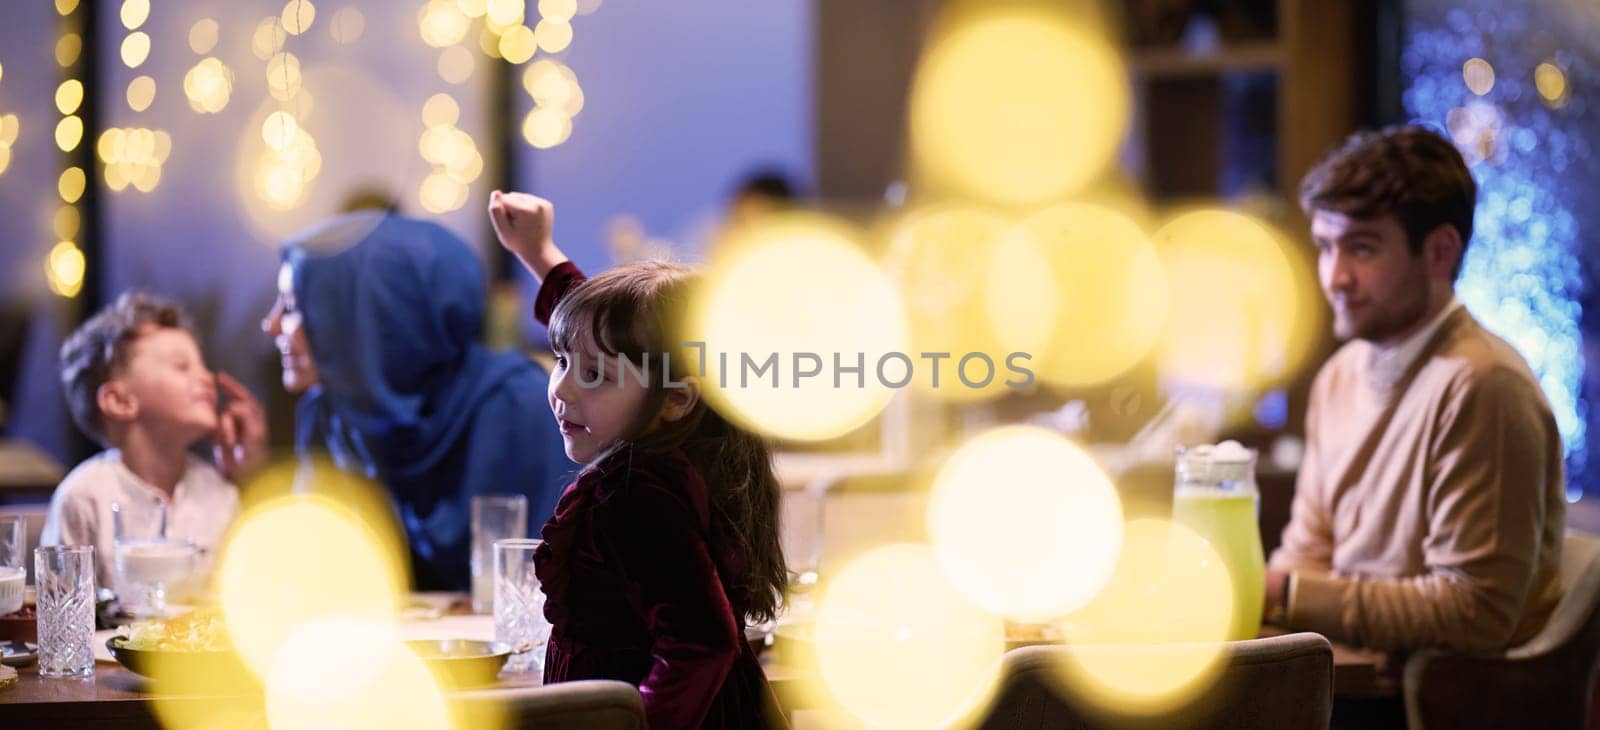 In a modern restaurant, an Islamic couple and their children joyfully await their iftar meal during the holy month of Ramadan, embodying familial harmony and cultural celebration amidst the contemporary dining ambiance by dotshock